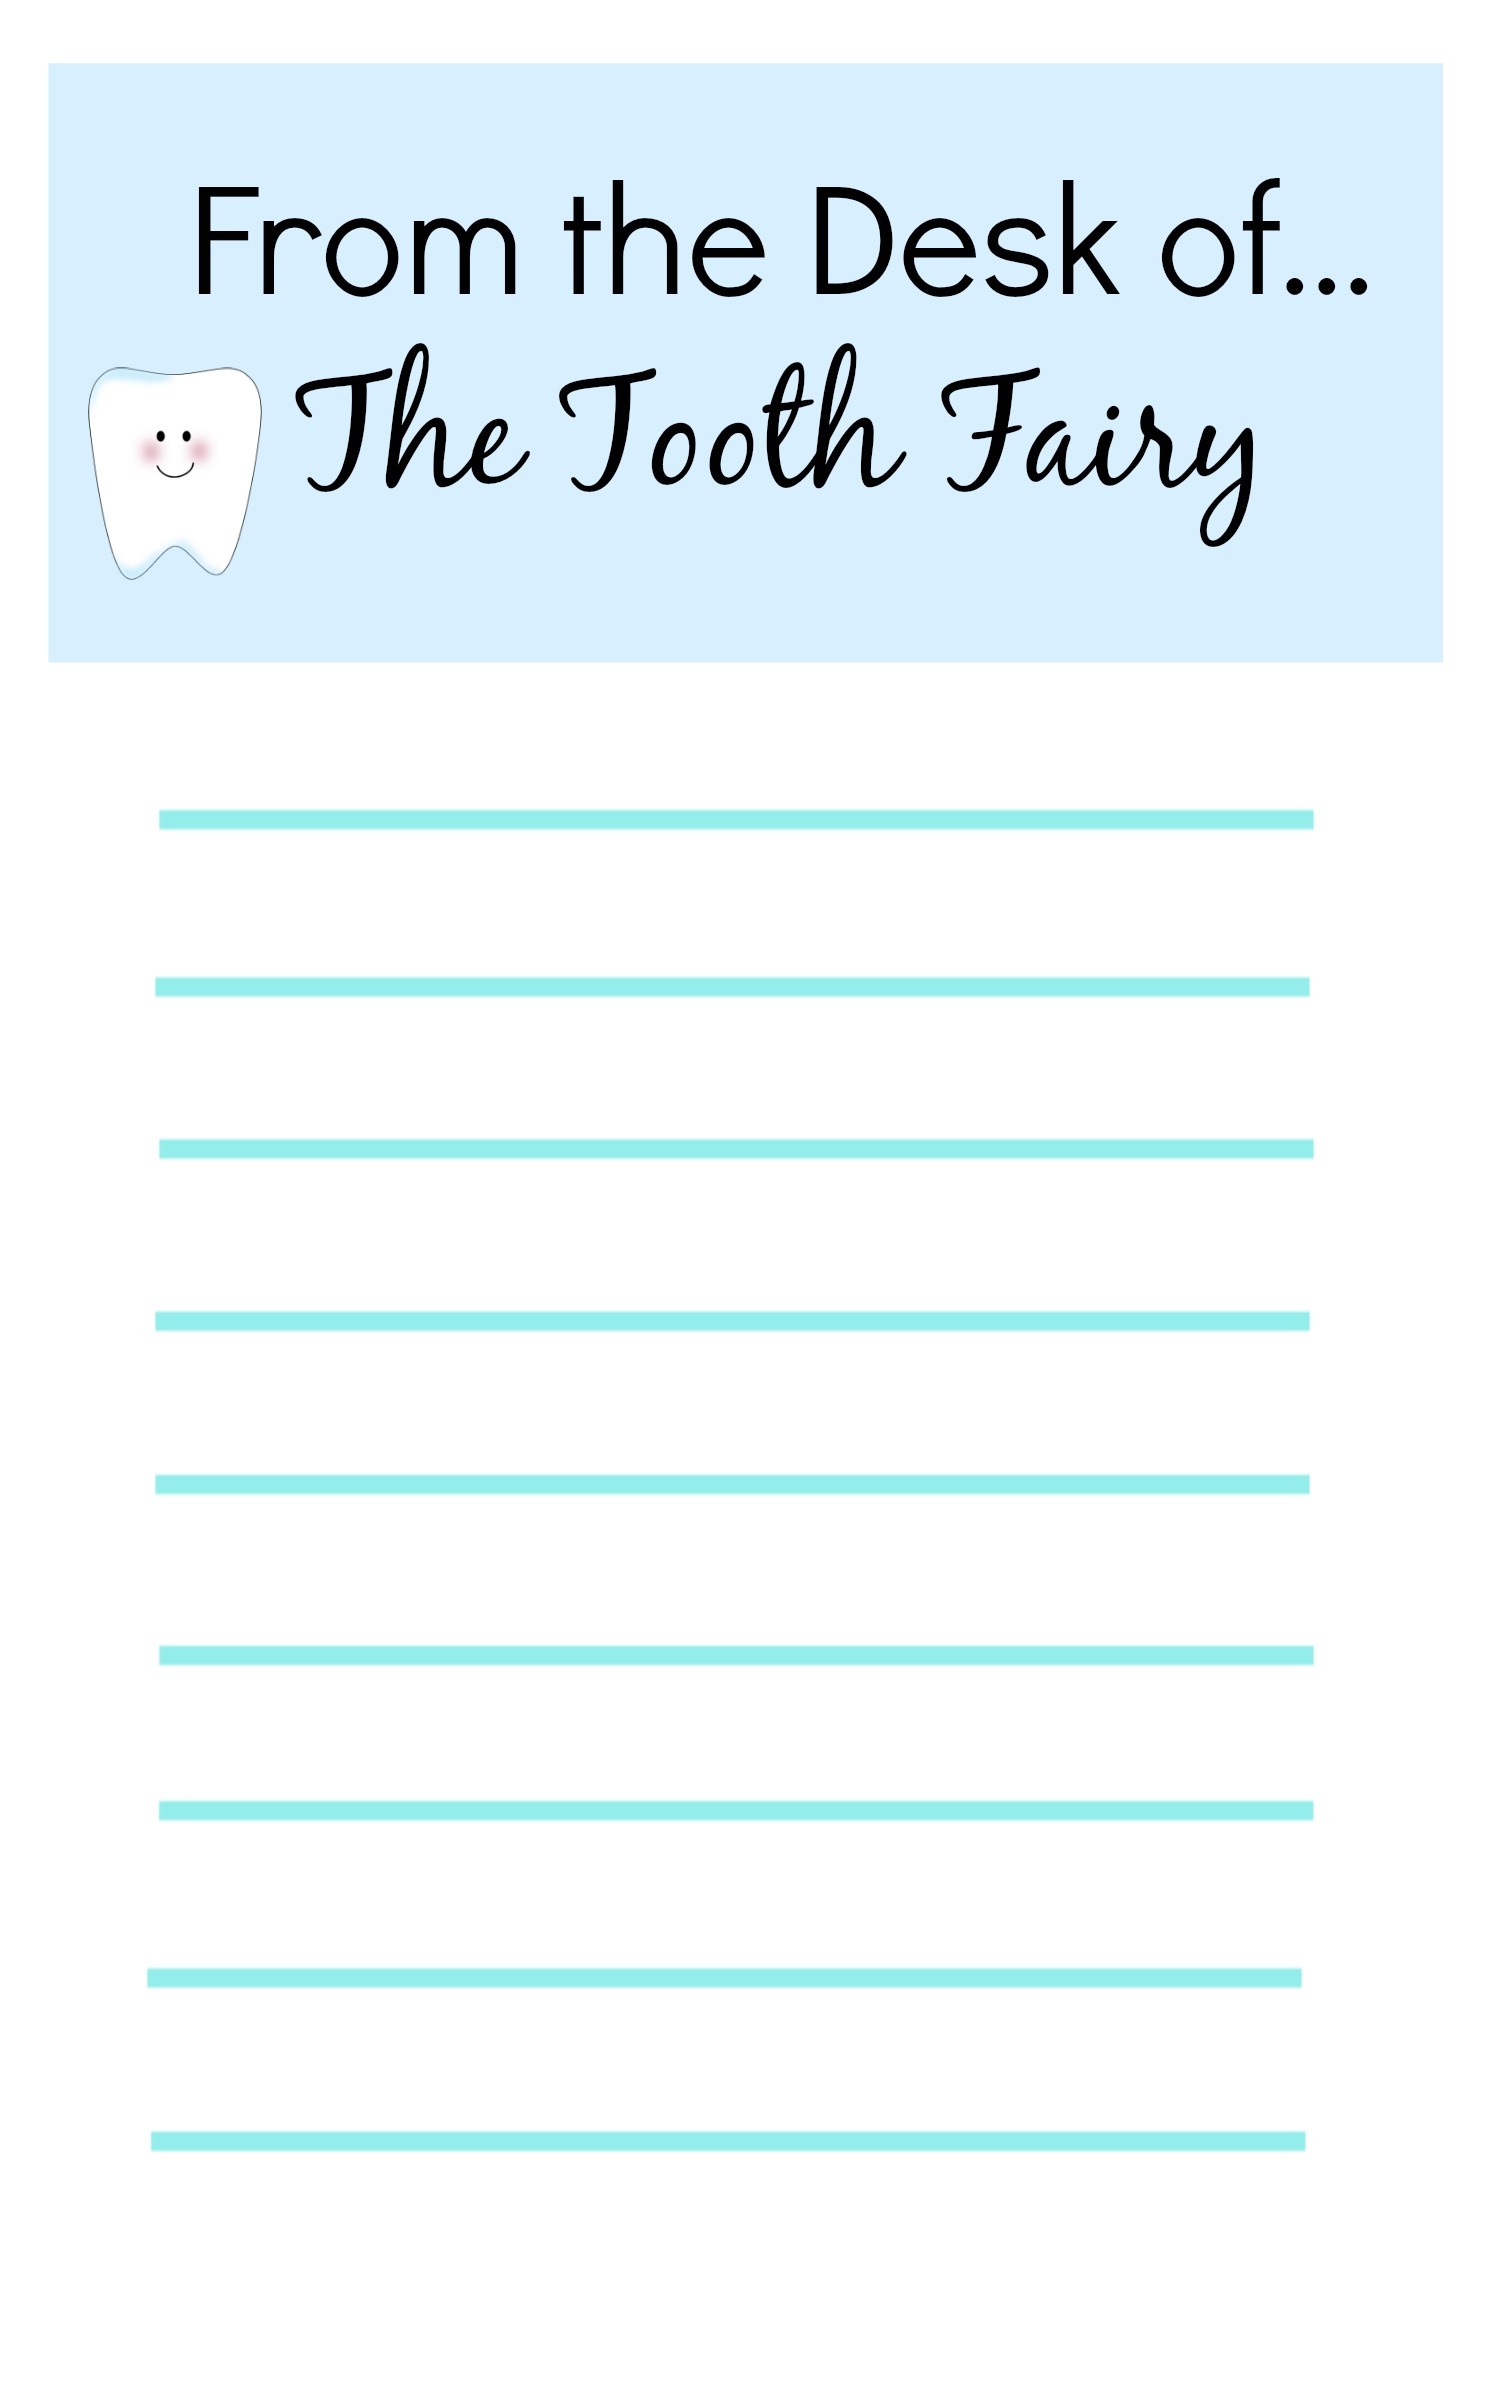 Tooth Fairy Ideas And Free Printables: Tooth Fairy Letterhead Report - Free Printable Notes From The Tooth Fairy